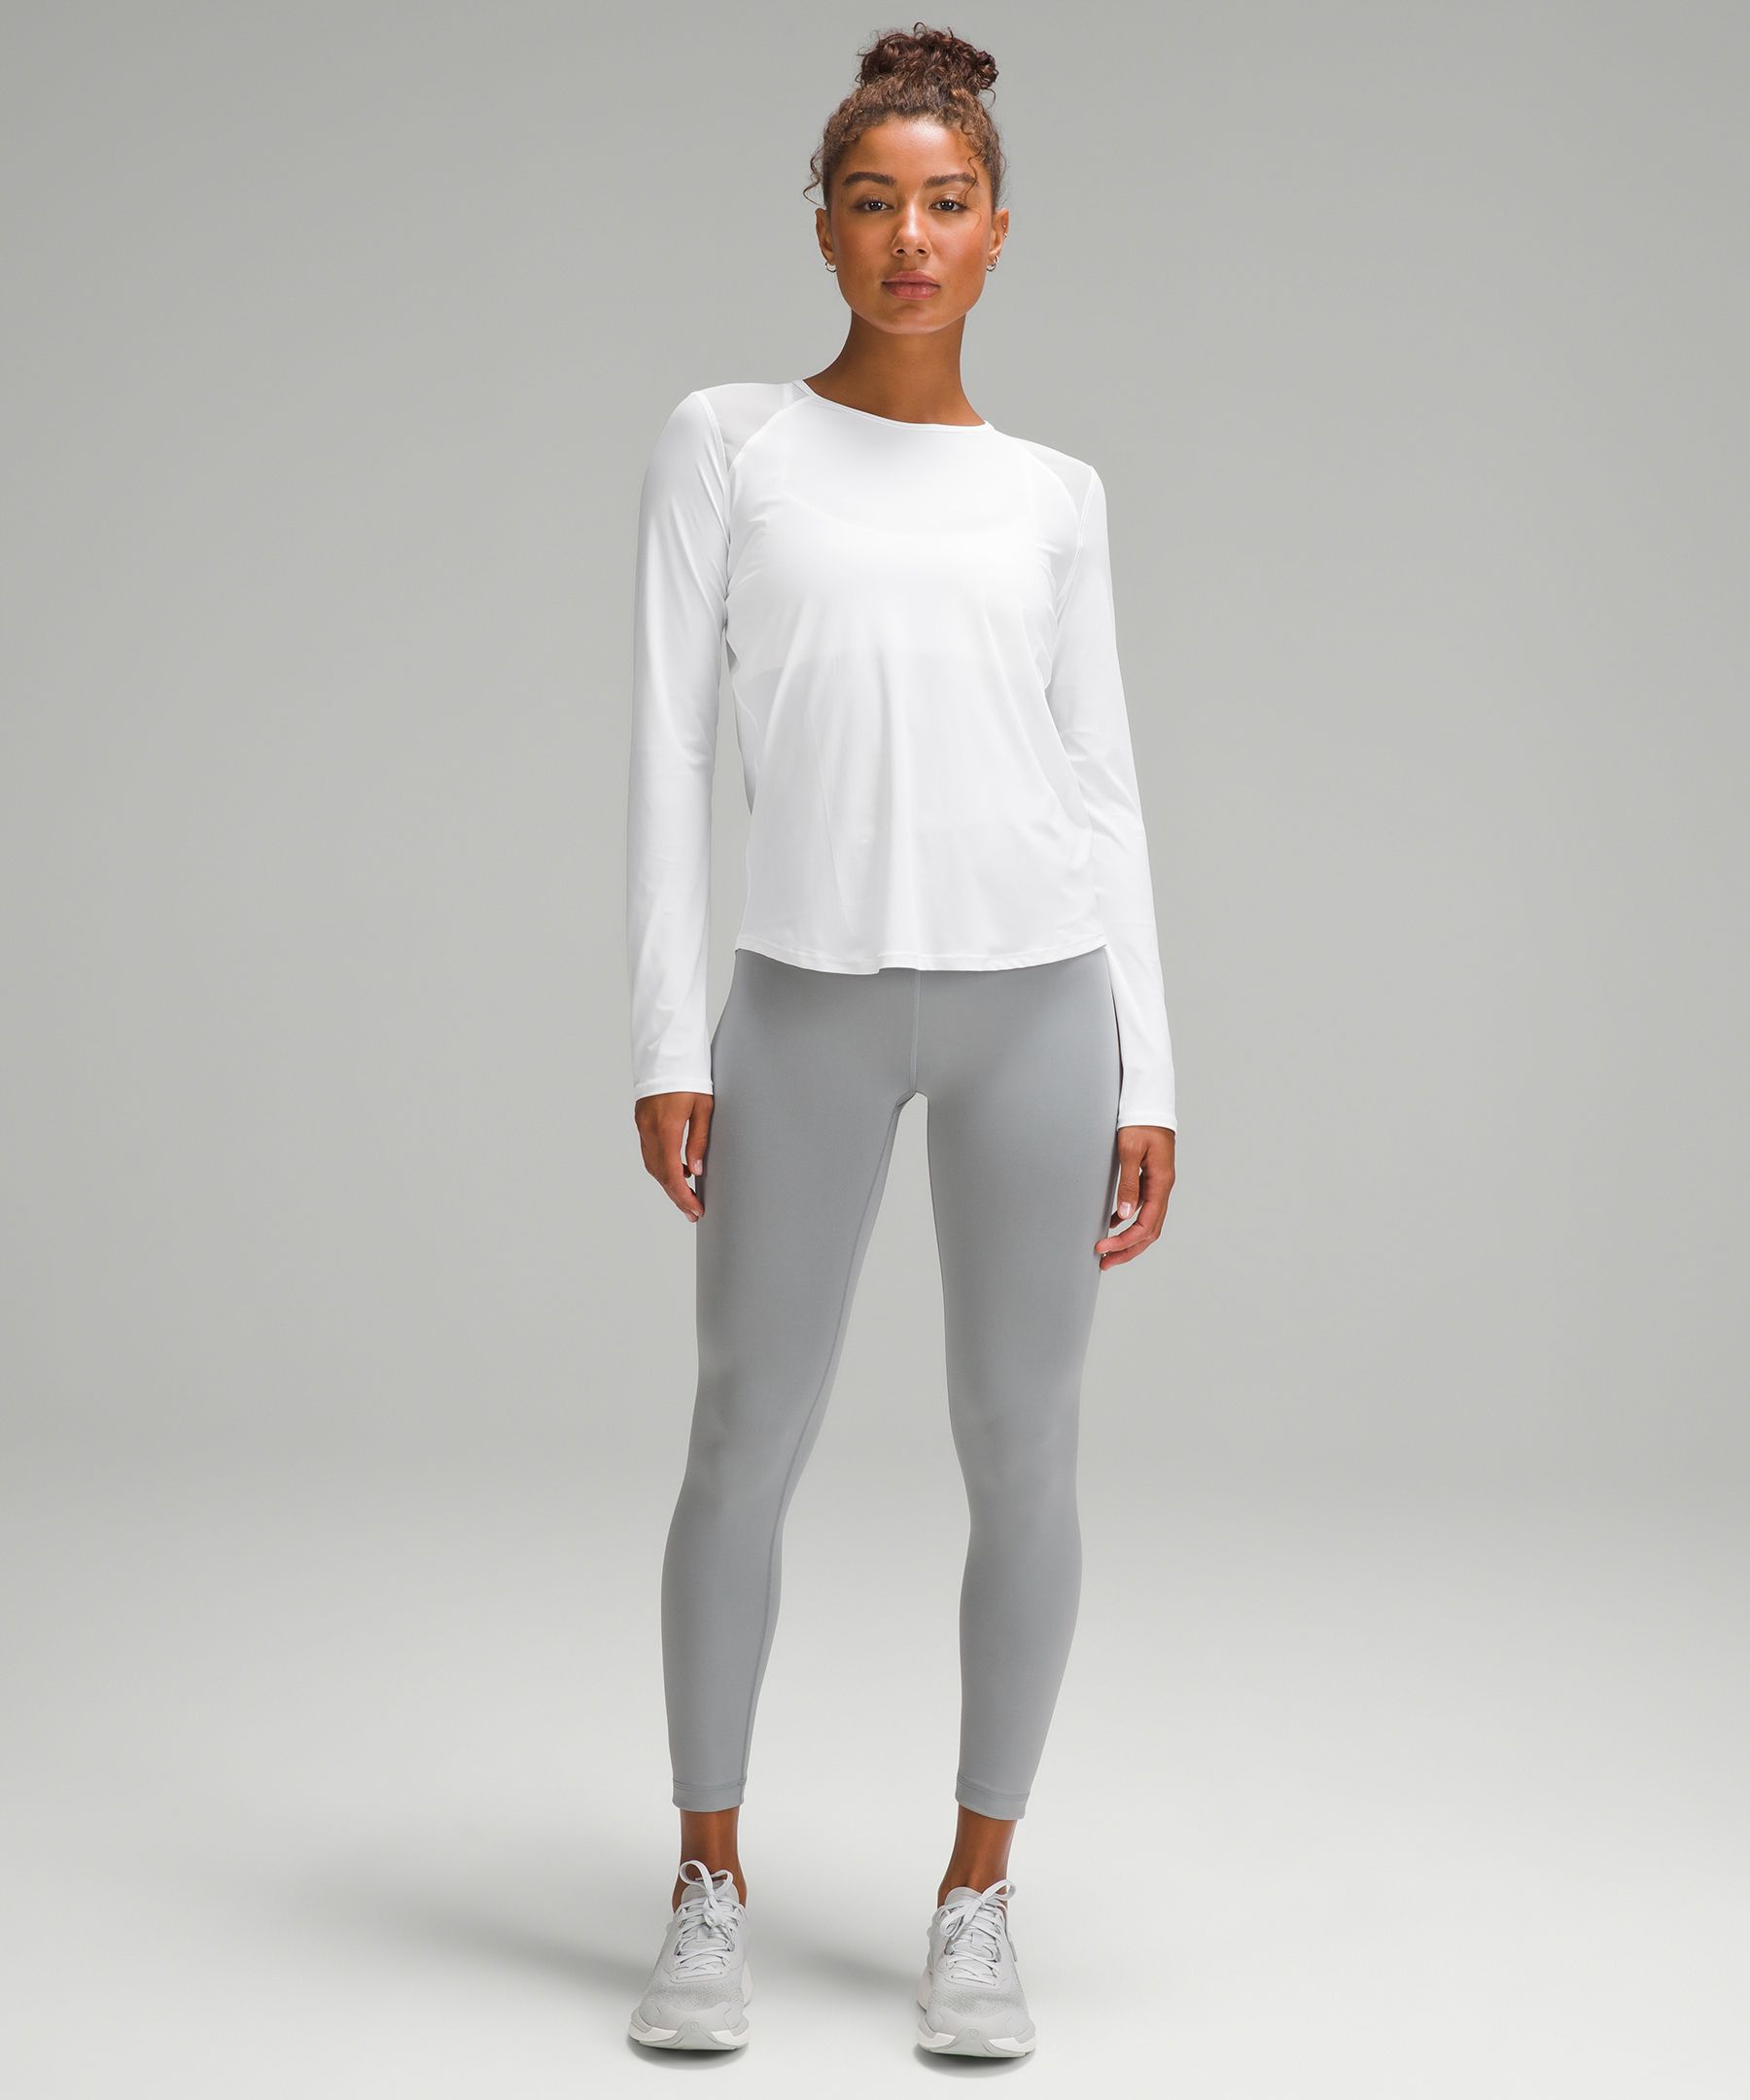 Lululemon Swiftly Breathe Relaxed-Fit Long Sleeve Shirt - ShopStyle  Activewear Tops